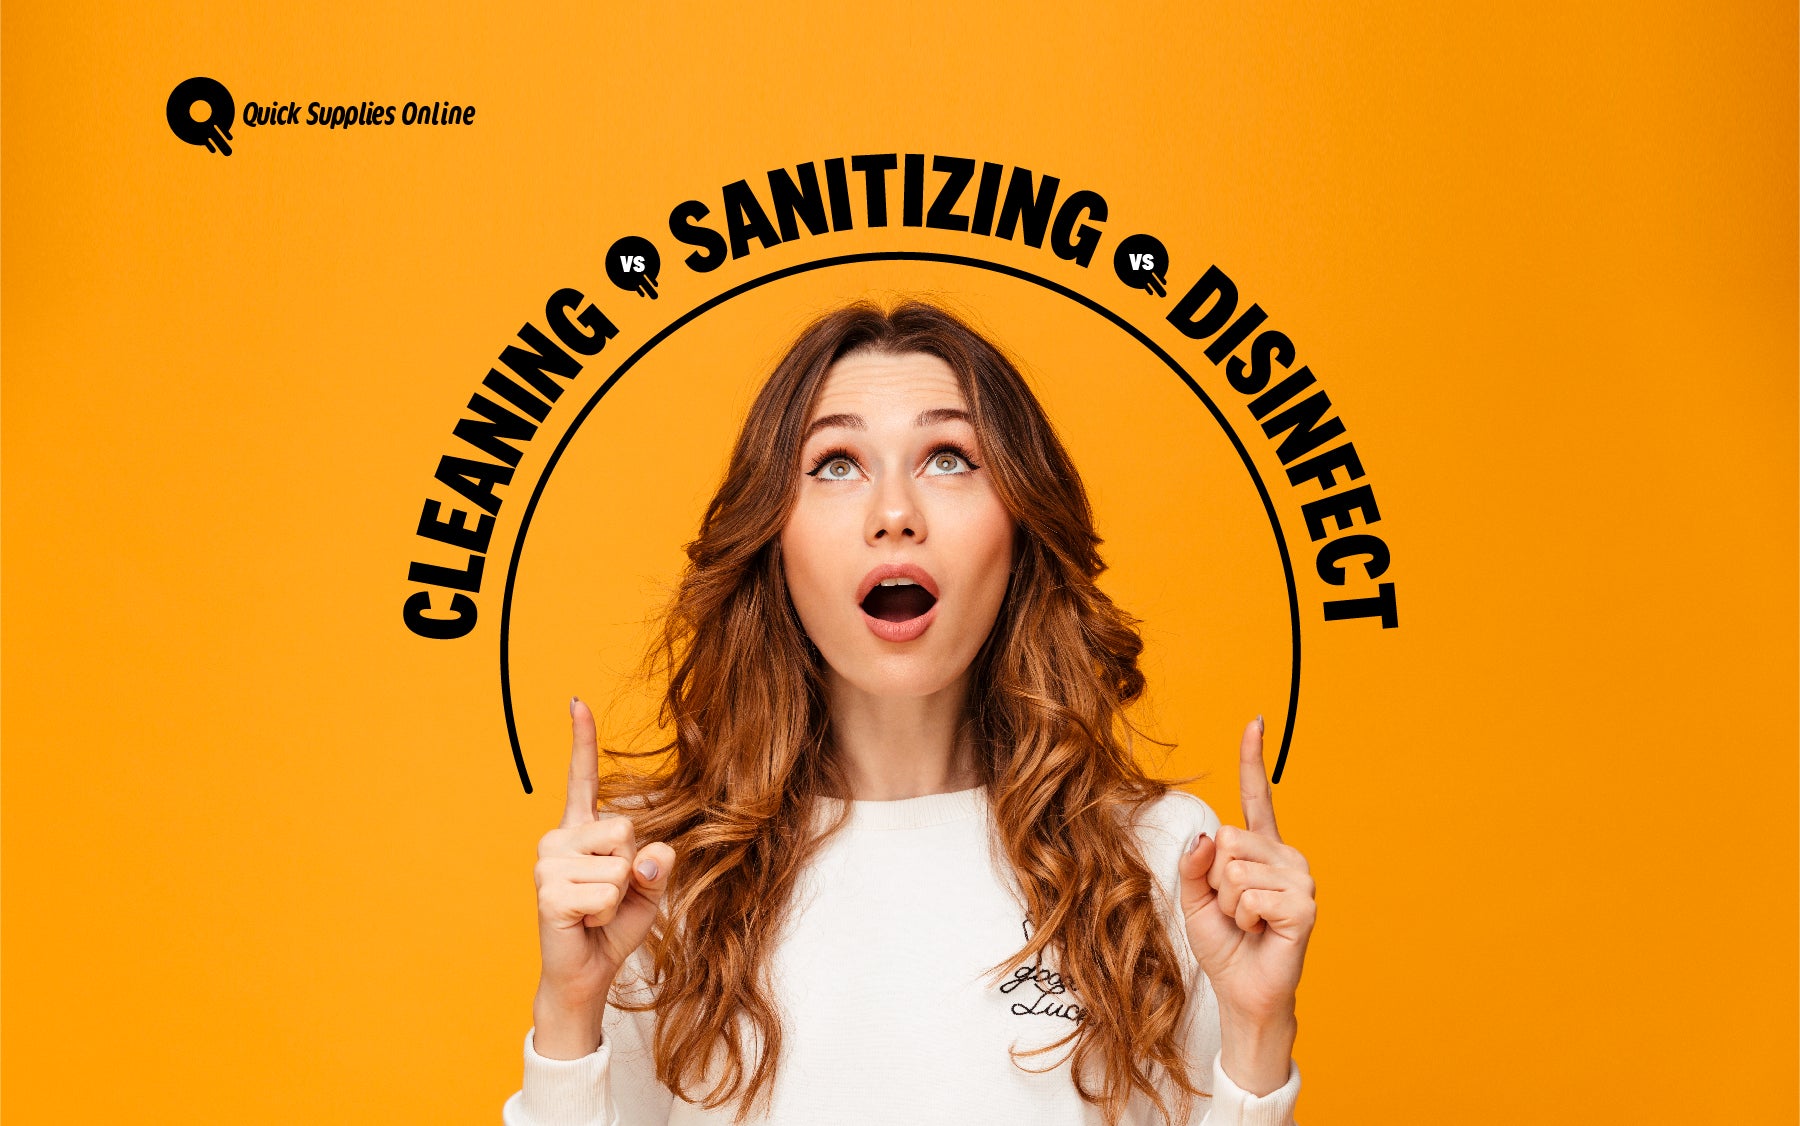 Guide to Choosing the Best Disinfectant